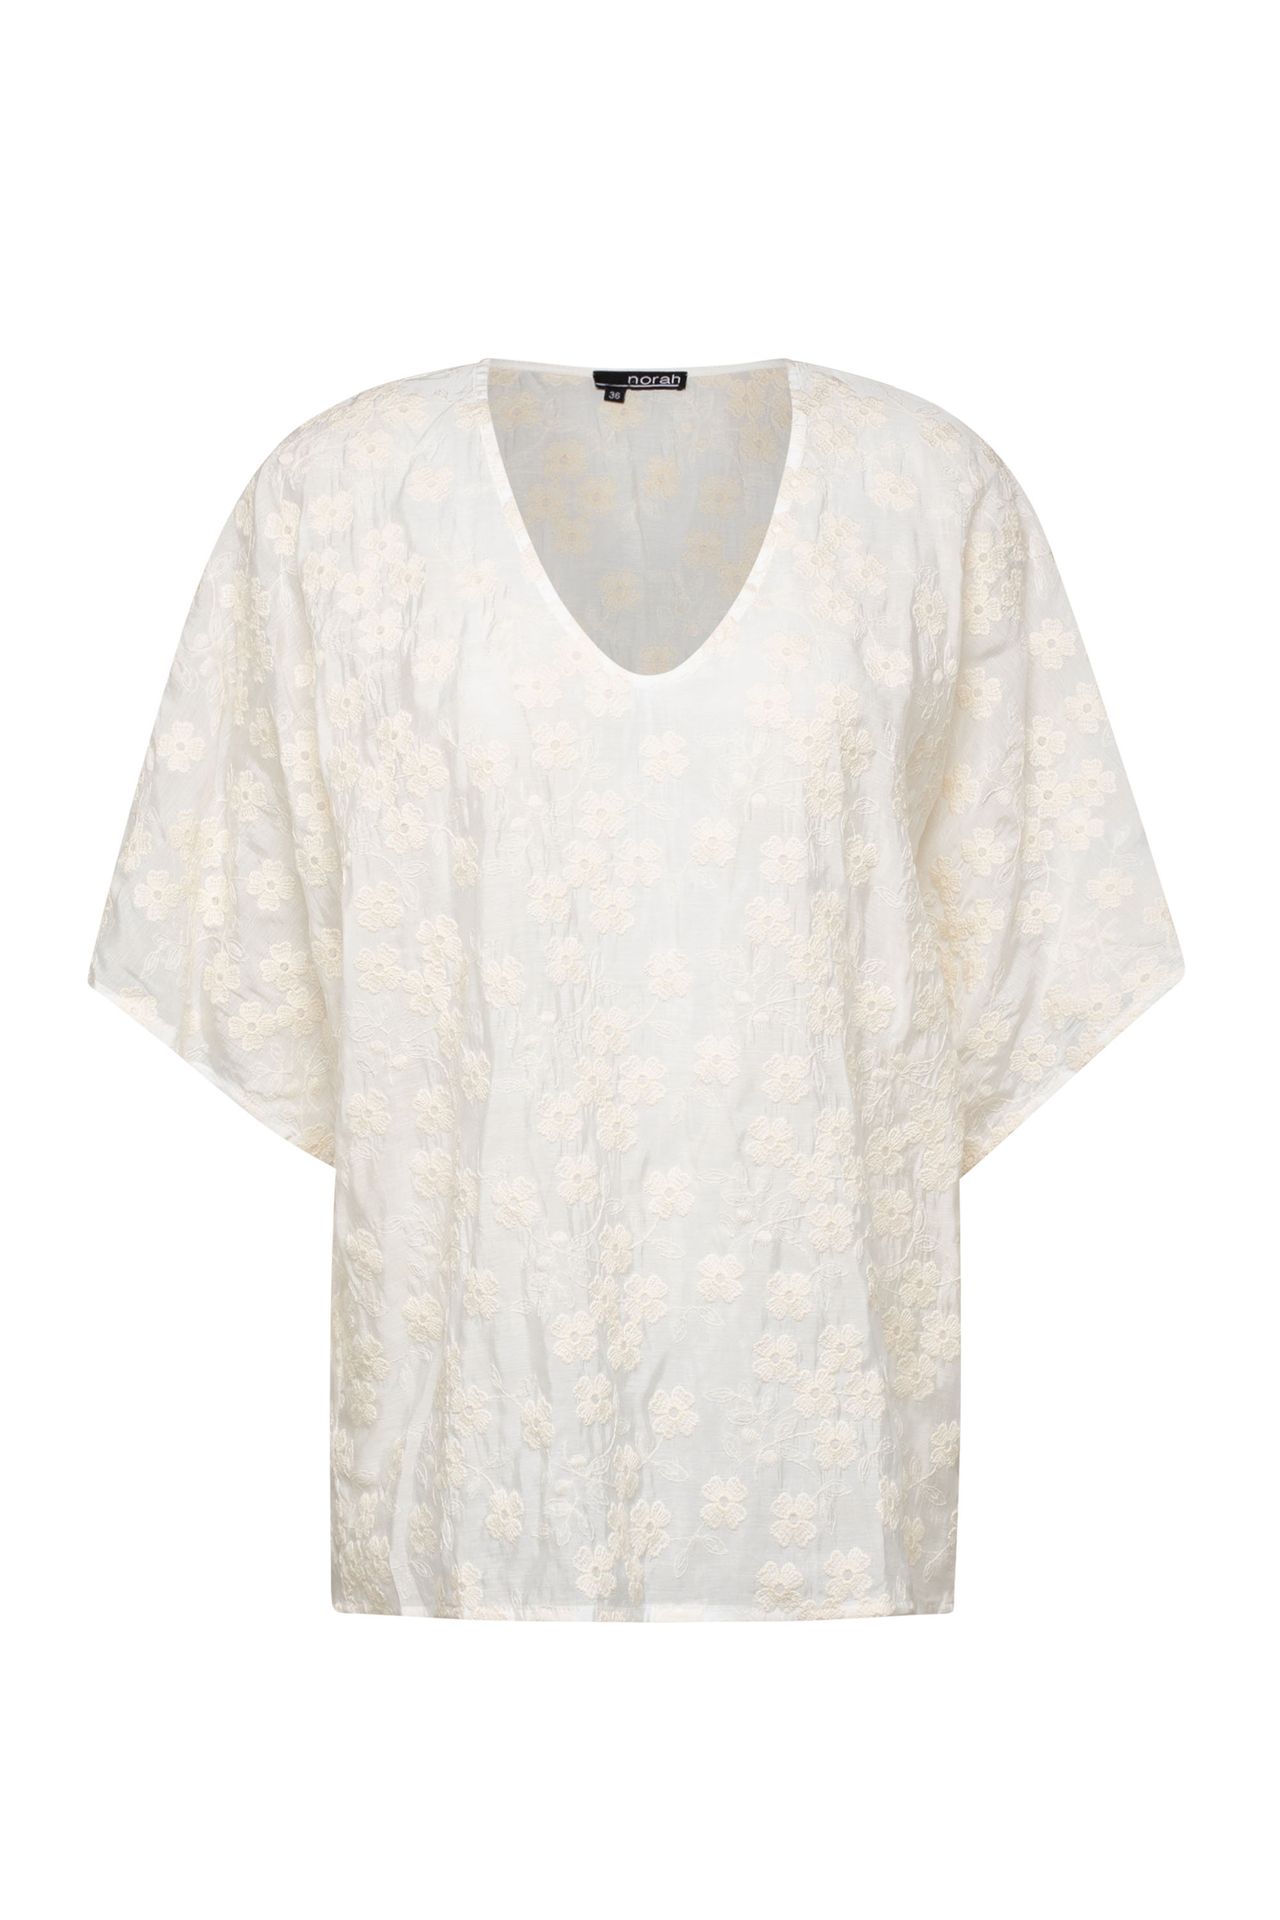 Norah Blouse wit off-white 212464-101